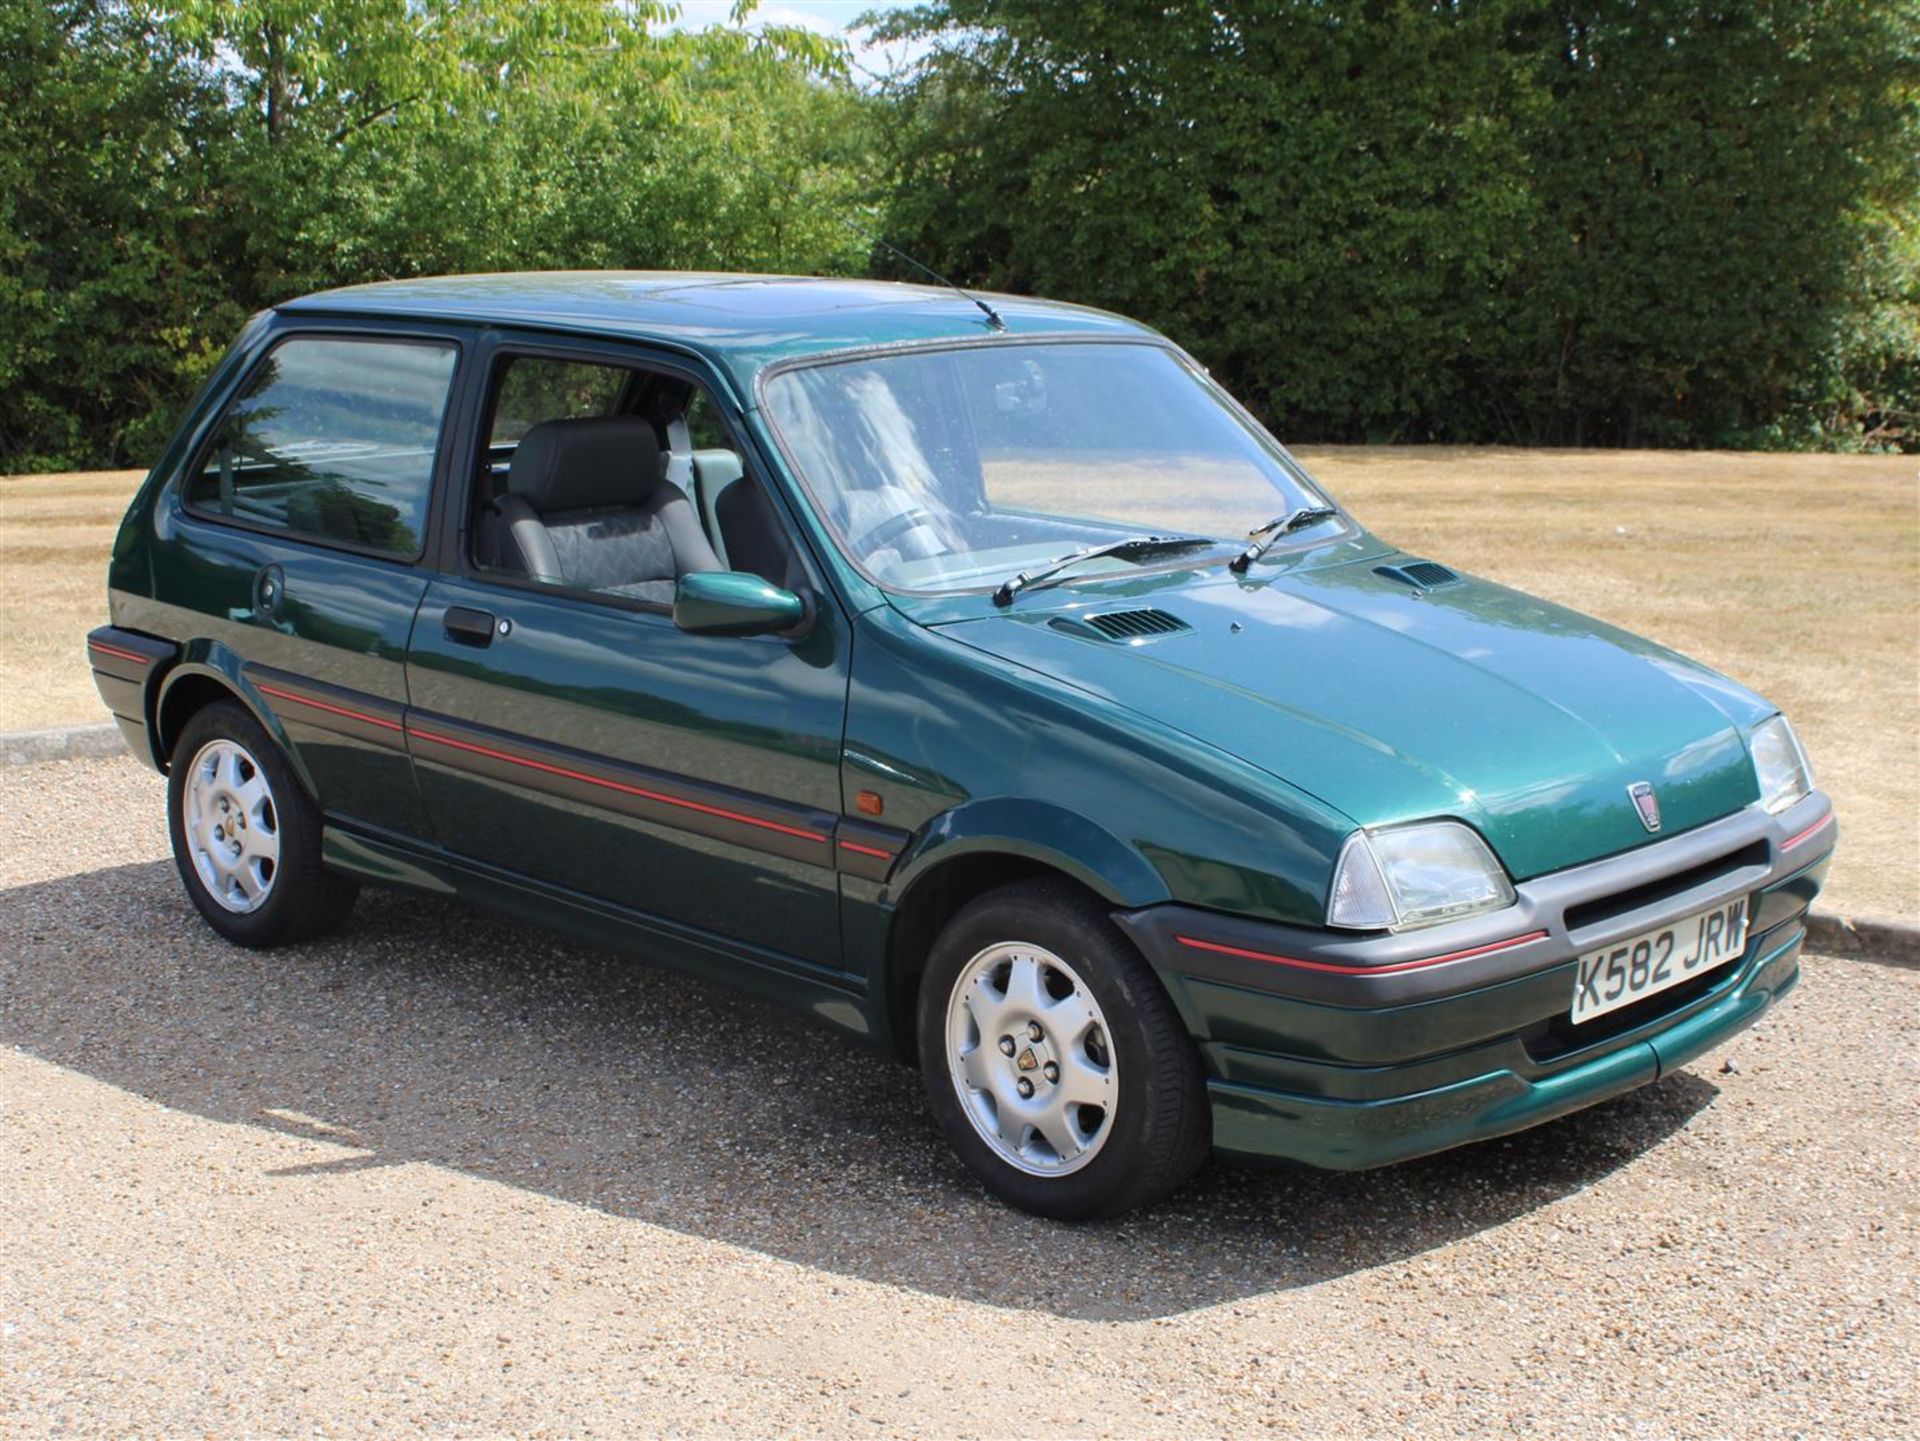 1993 Rover Metro 1.4 GTi 16v 39,675 miles from new